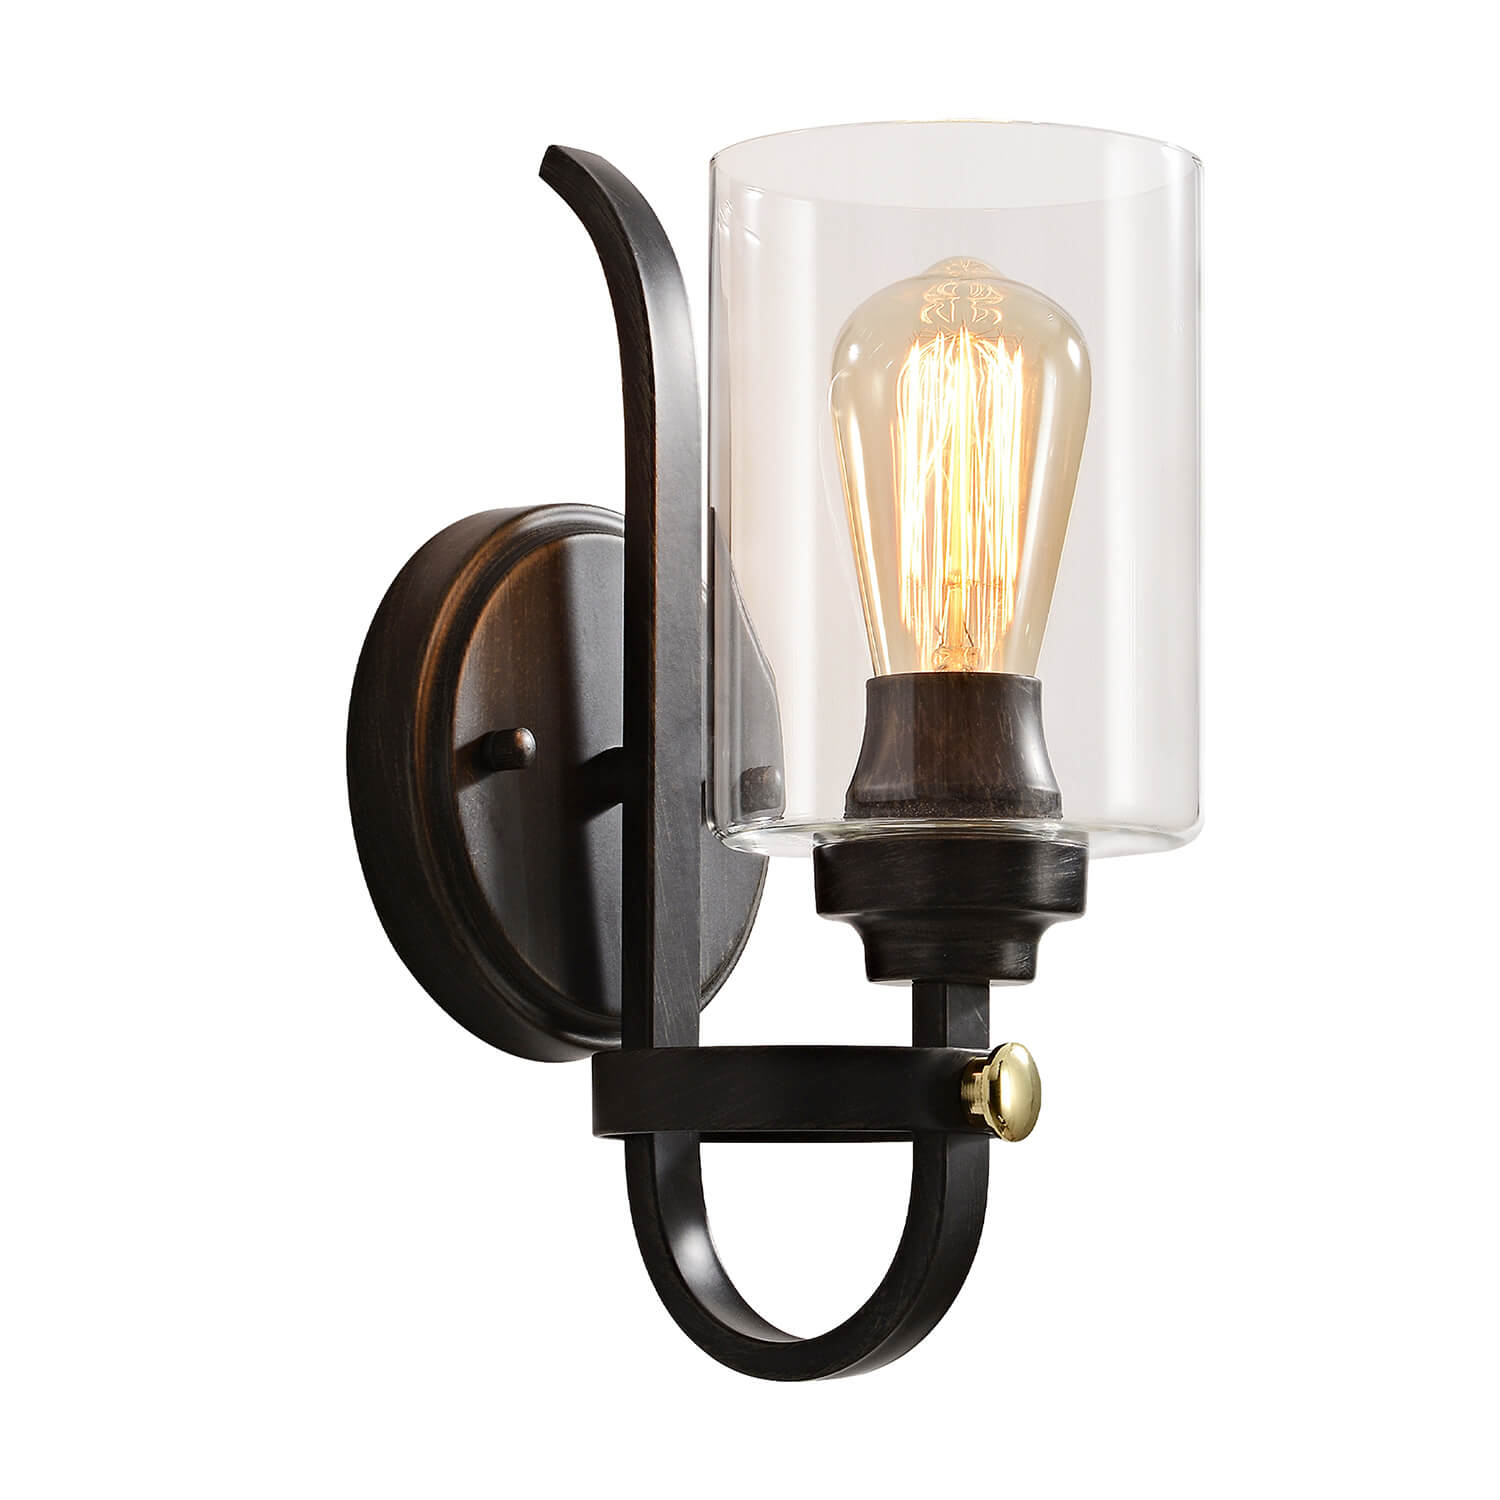 Alfreda 1 Light Antique Black and Gold Finish Glass Shade Wall Sconce LJ-9765-UCK